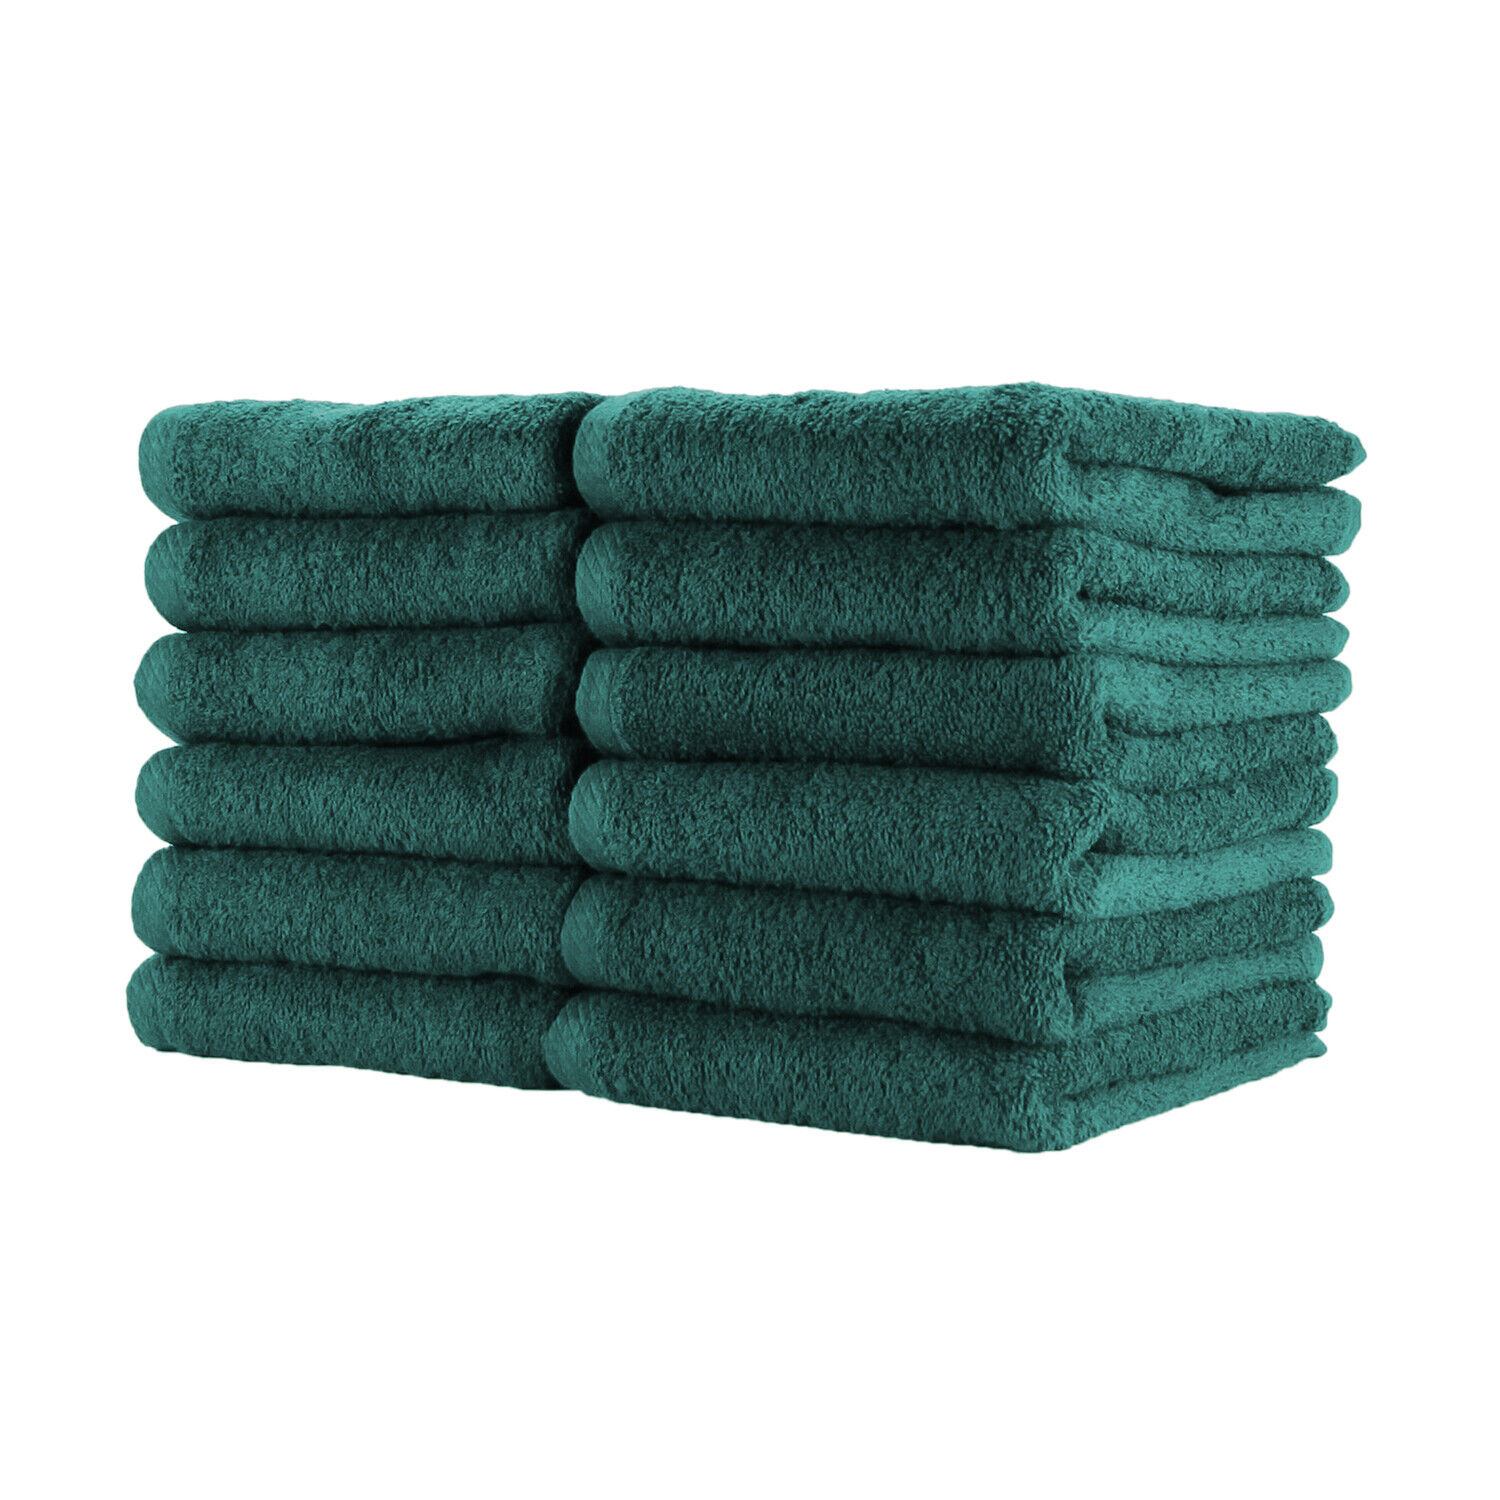 Salon Towels - Packs of 12 - Bleach Safe 16 x 27 Cotton Towel - Color Options  Arkwright Does Not Apply - фотография #11